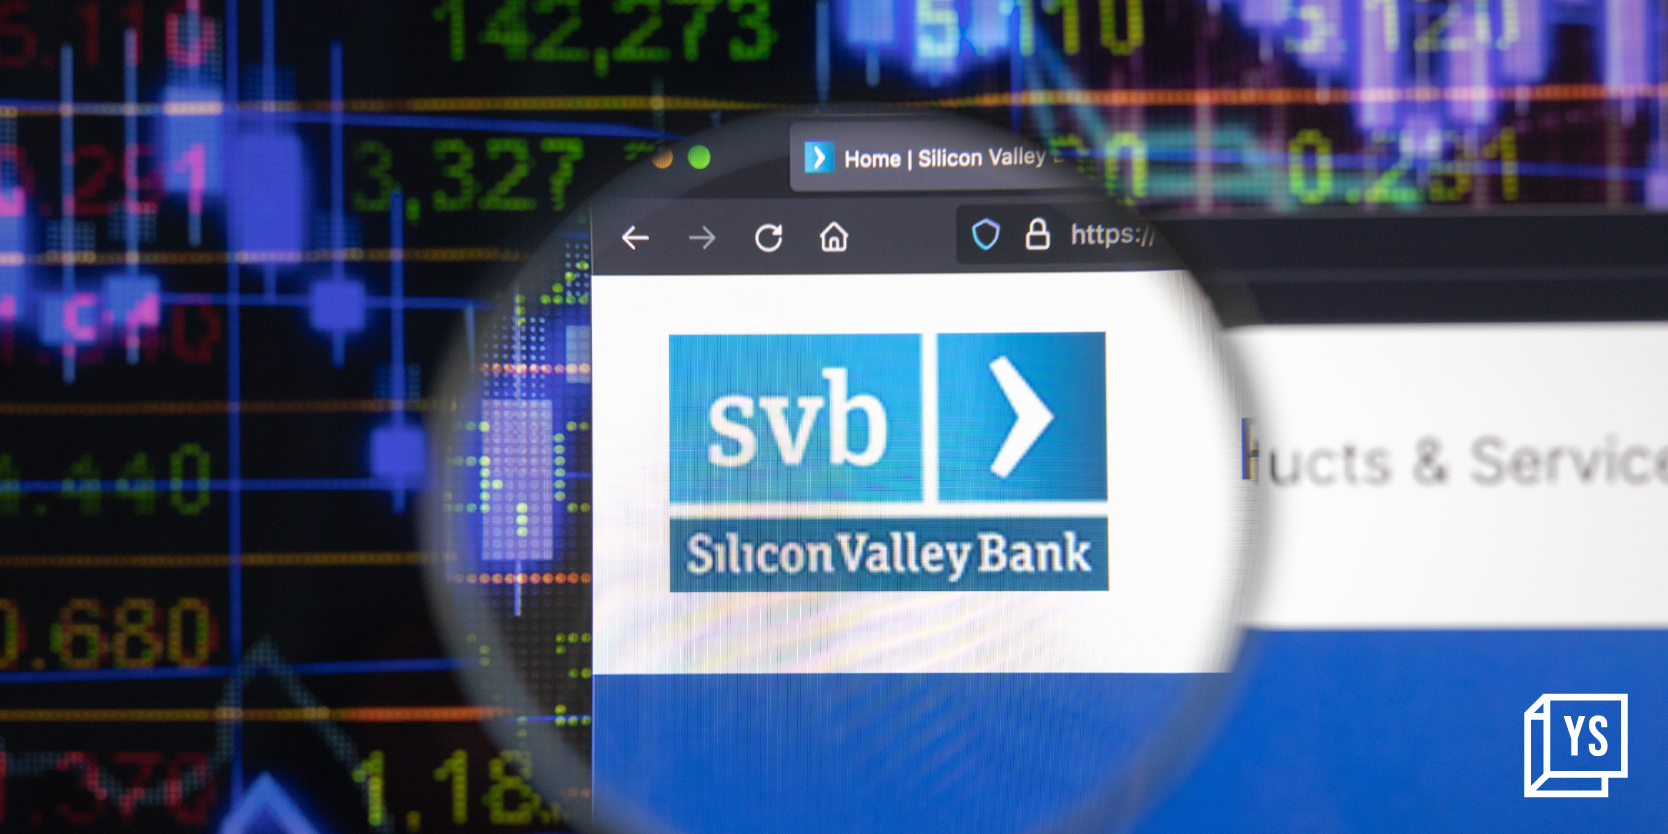 Govt's immediate steps ensured Indian startups were not adversely impacted by SVB crisis: Ashwini Vaishnaw